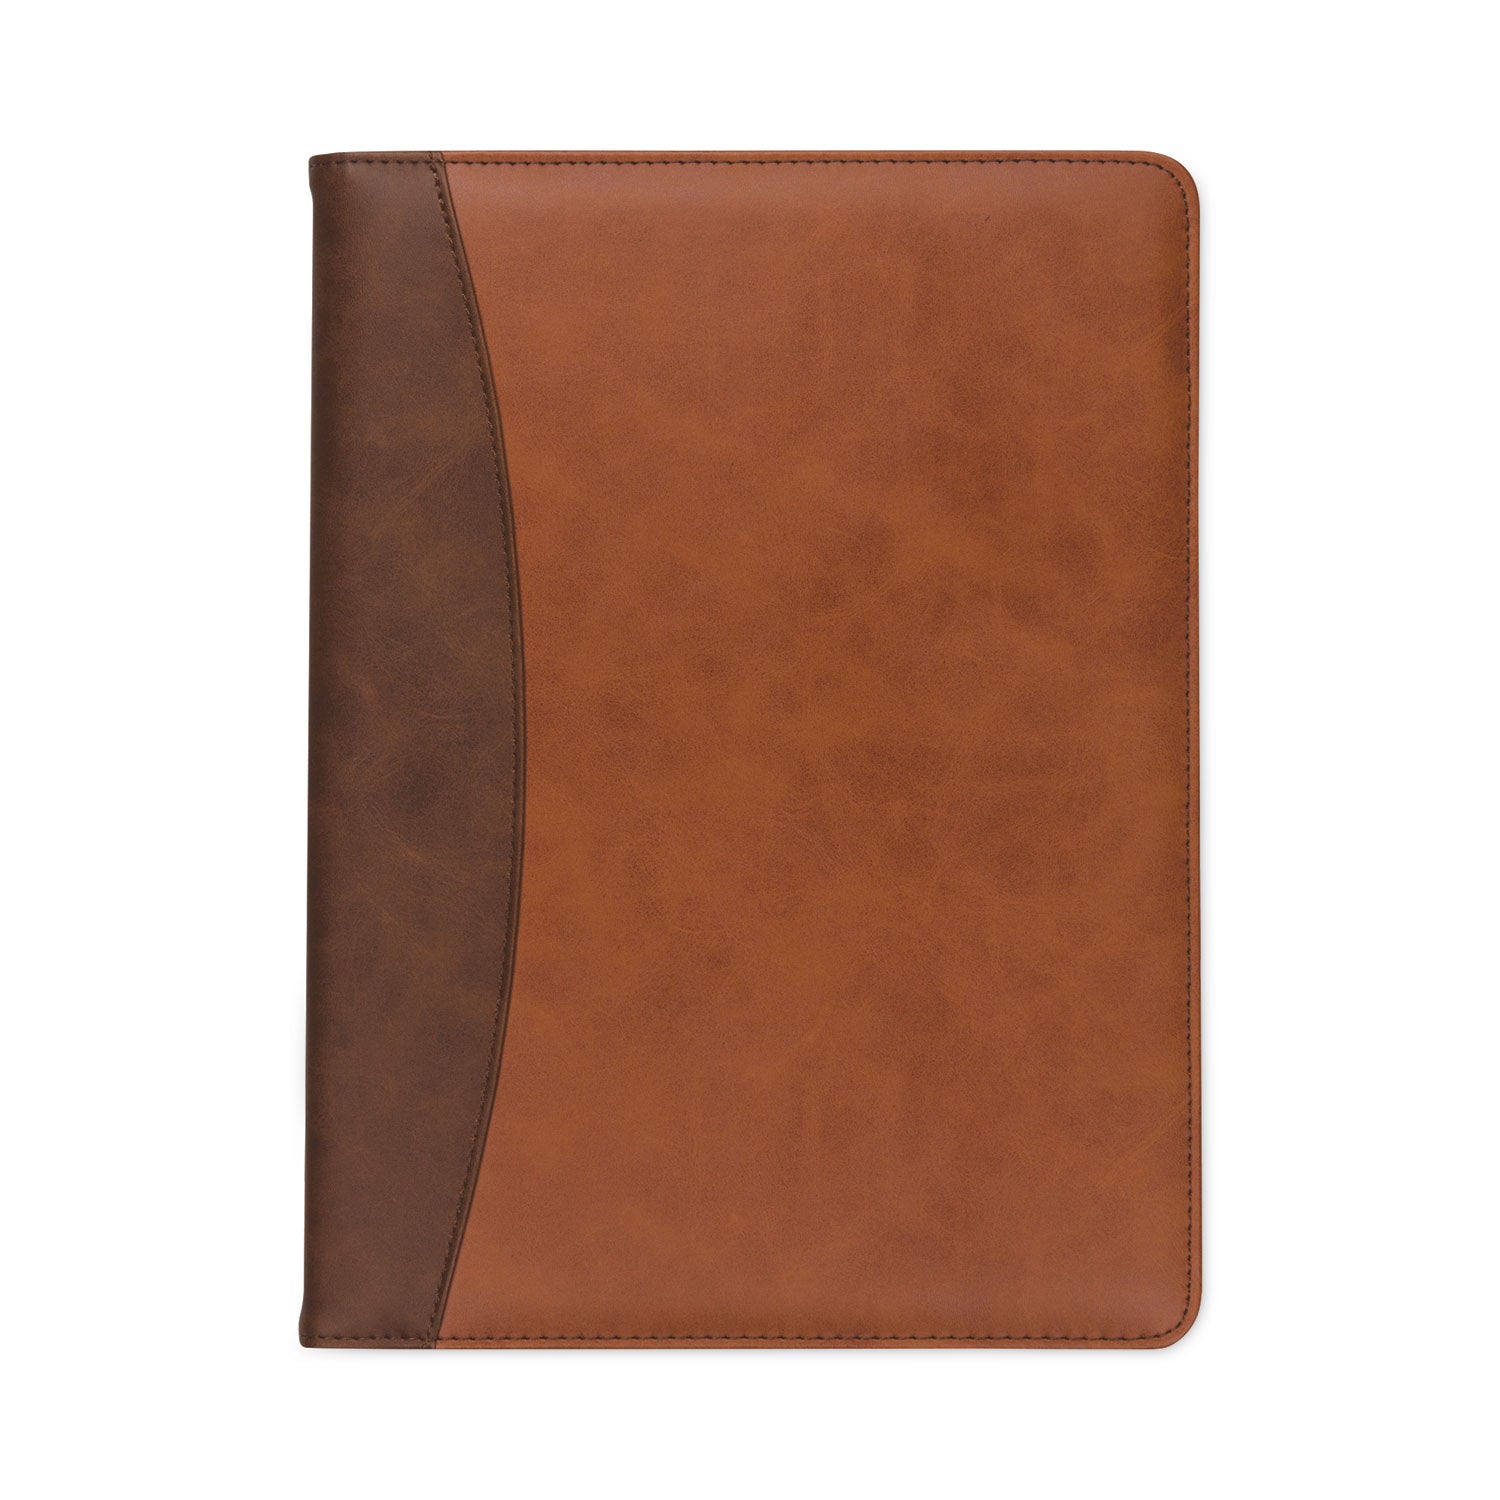 two-tone-padfolio-with-spine-accent-106w-x-1425h-polyurethane-tan-brown_sam71656 - 1